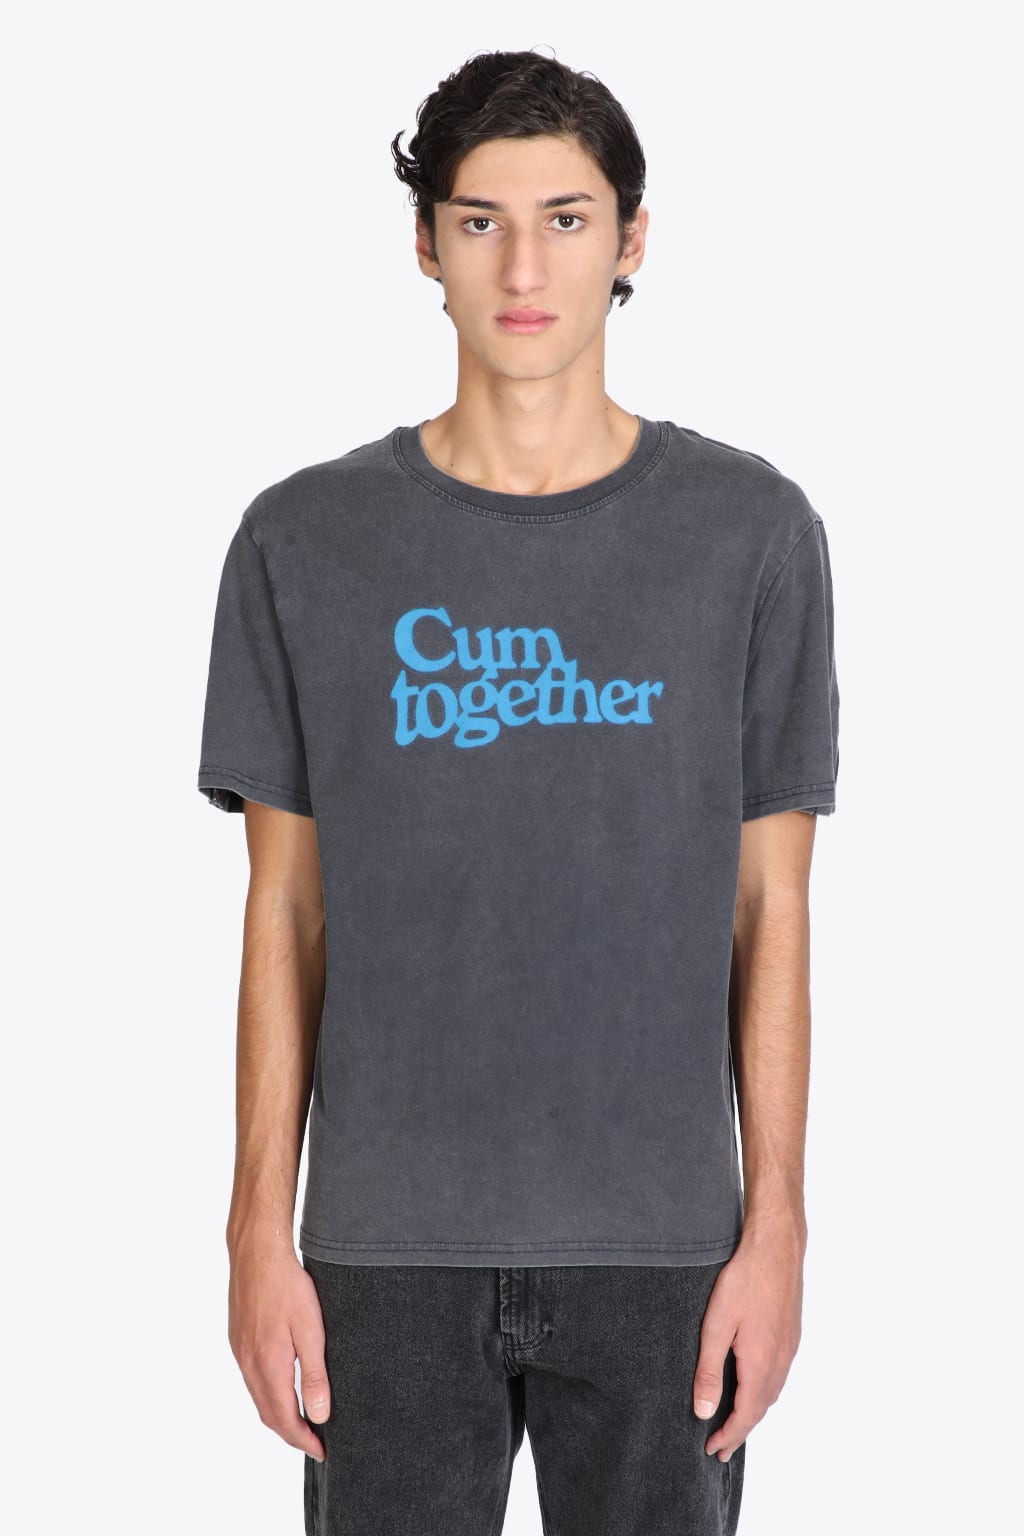 Carne Bollente Cum Togheter Washed balck t-shirt with open sleeves - Cum together